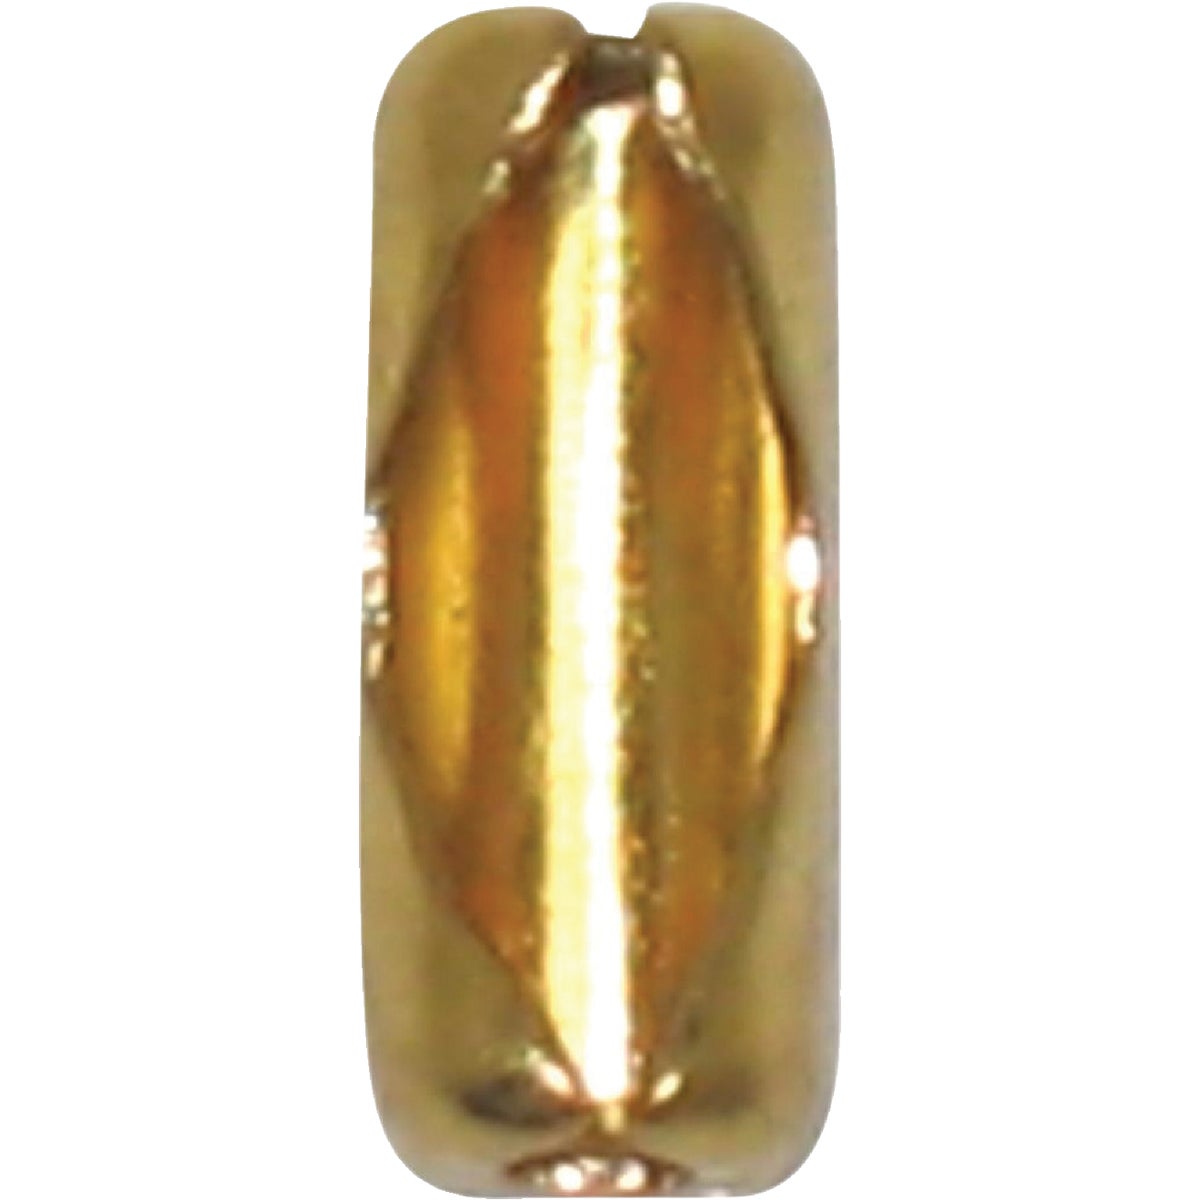 Item 540986, Polished brass finish bead chain connector.